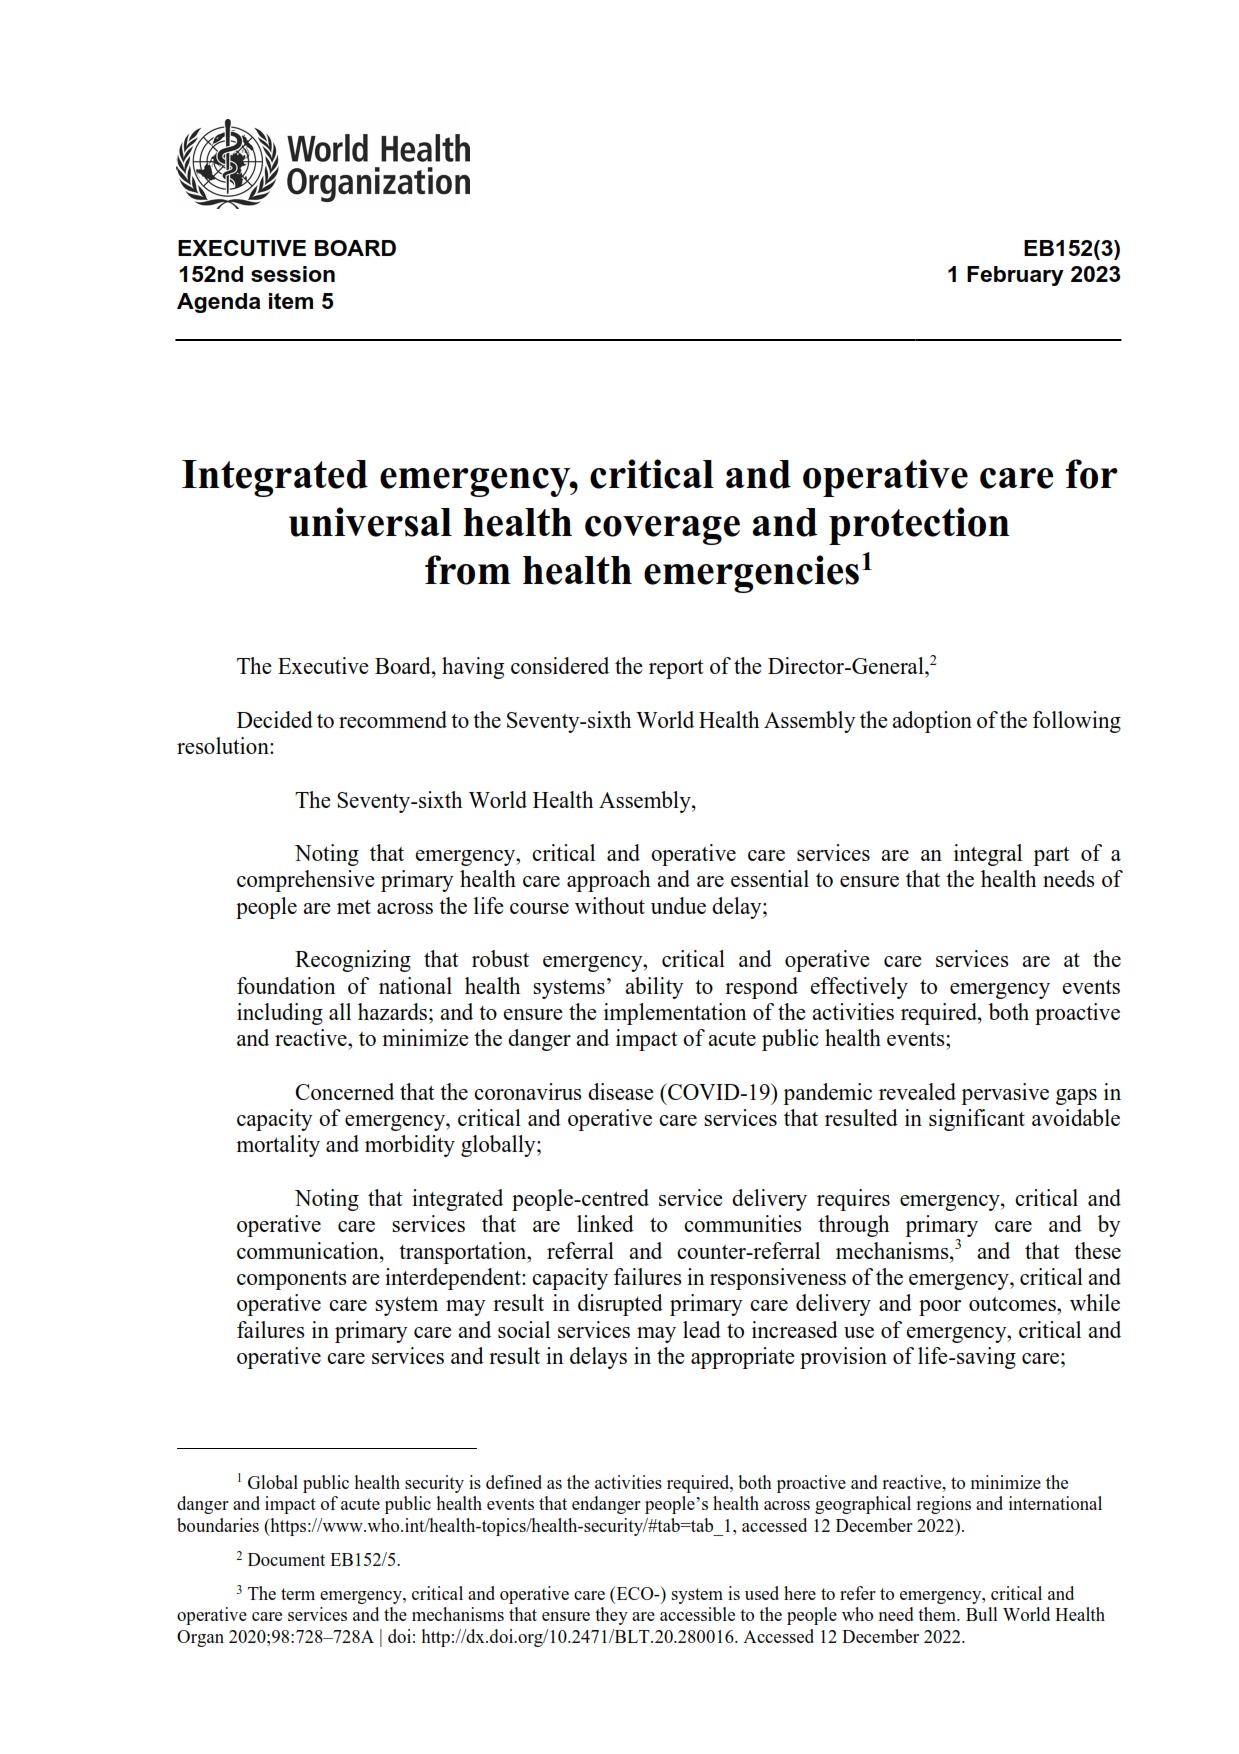 integrated_emergency_critical_and_operative_care_for_uhc_and_protection_from_health_emergencies